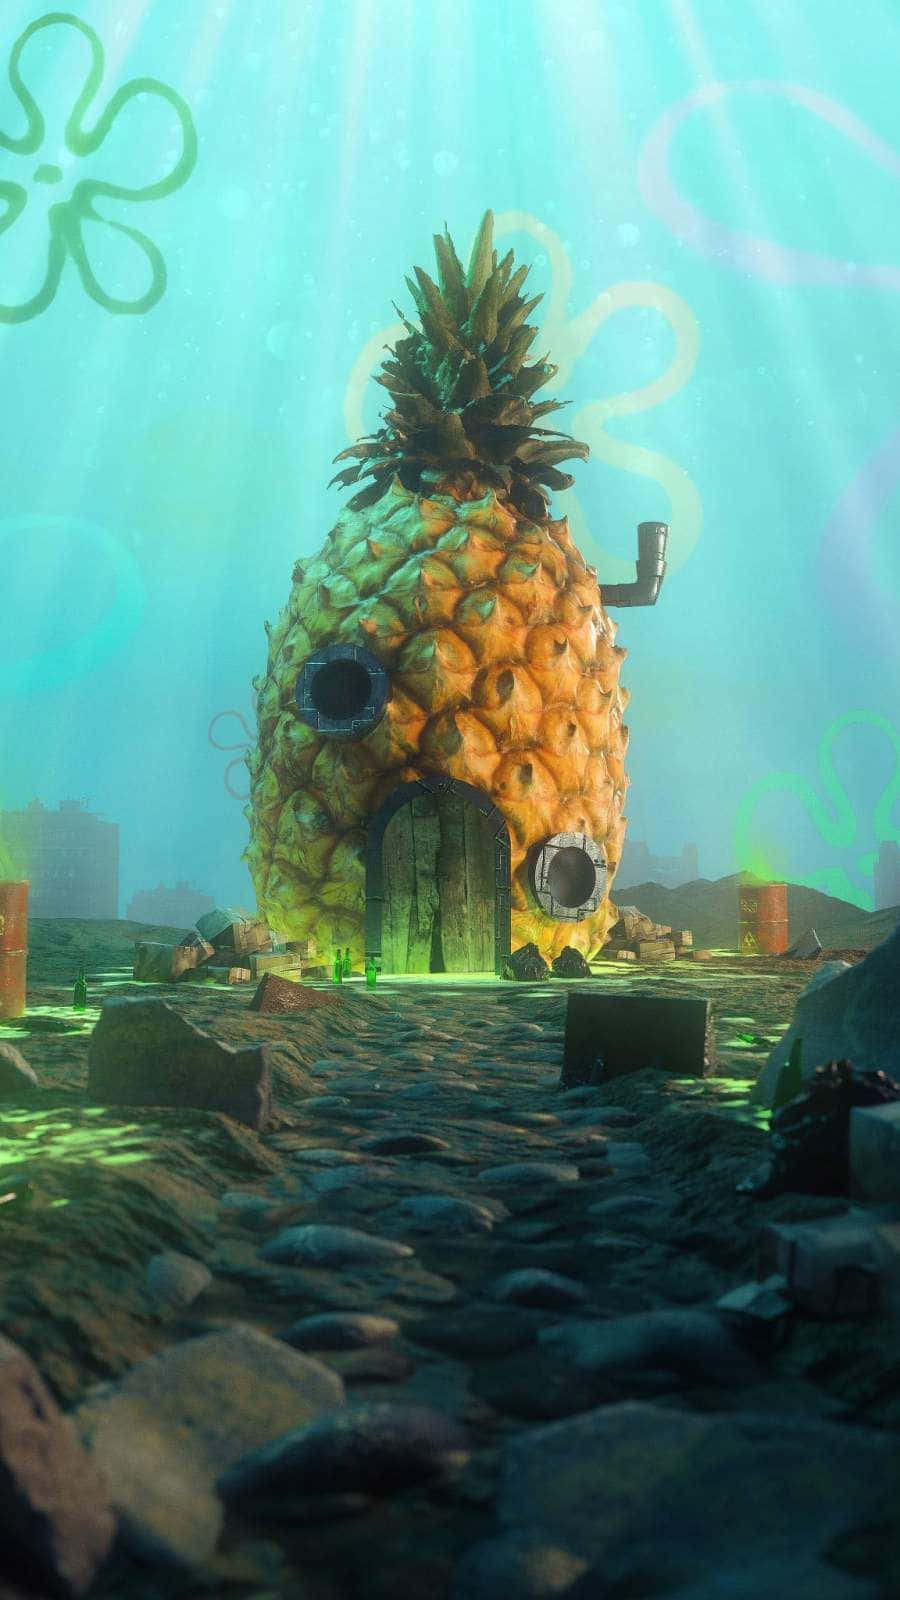 Spend A Day With Spongebob at His Iconic House Wallpaper